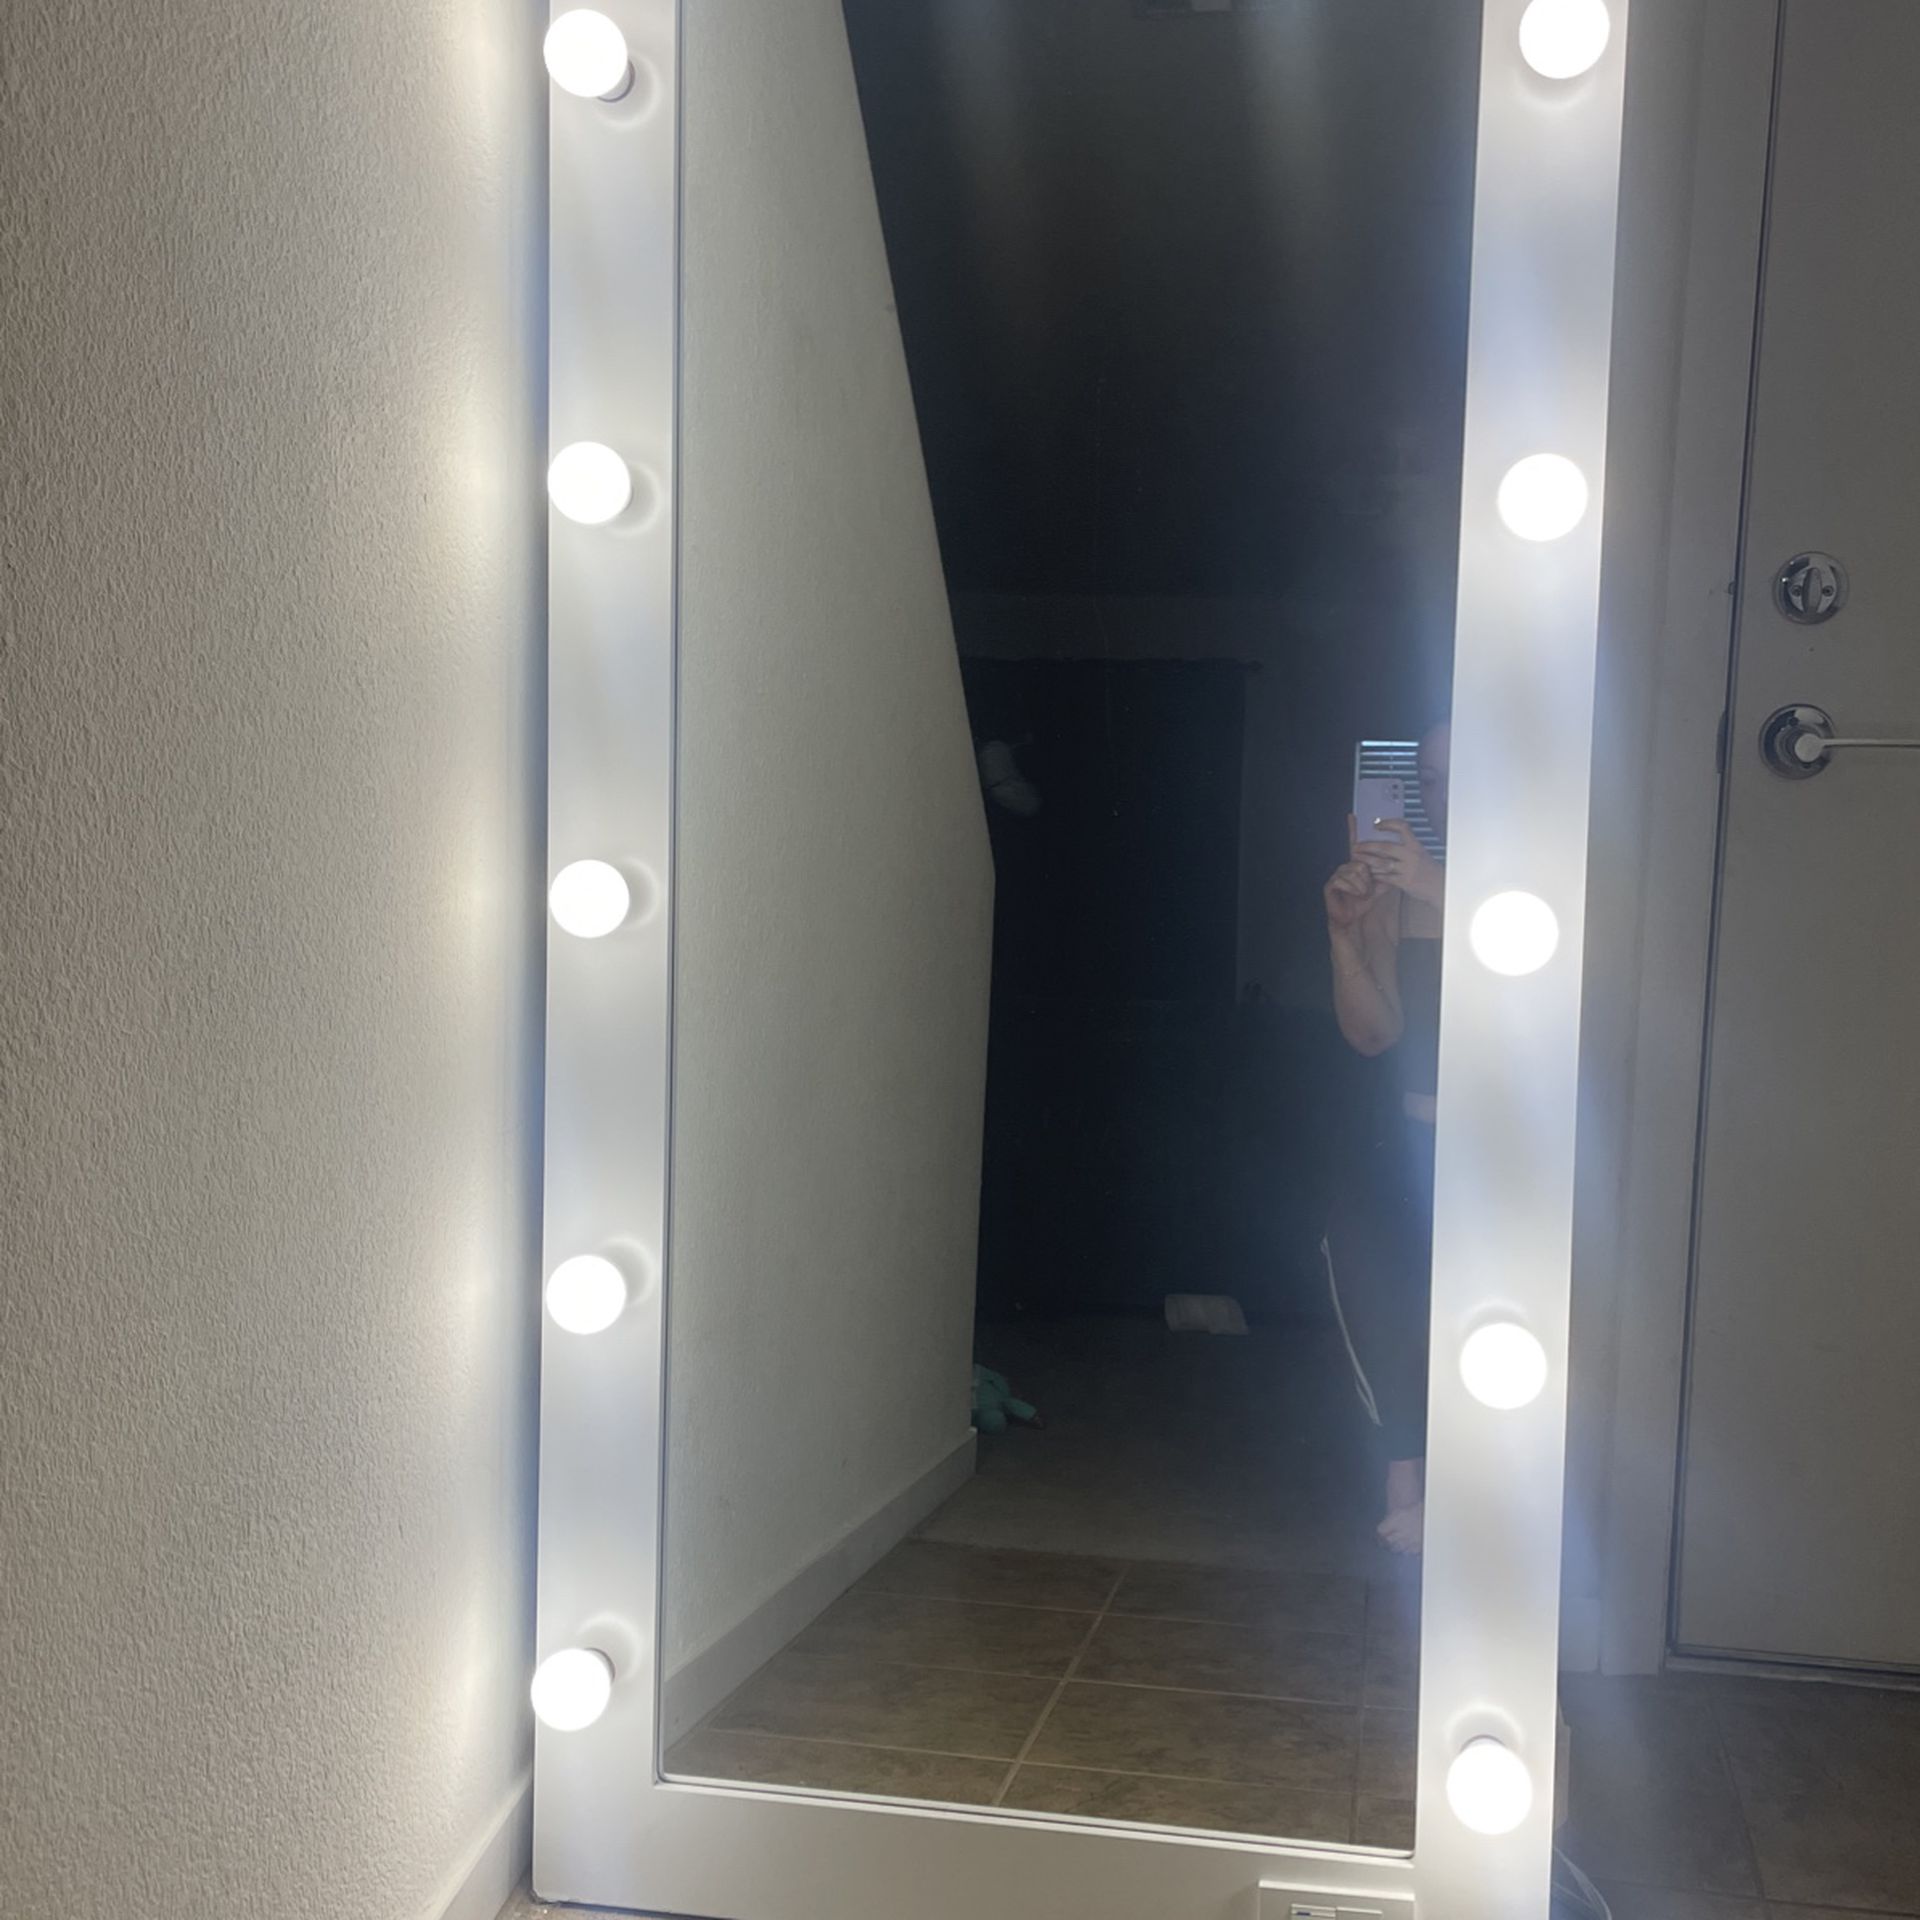 Brand New Mirror With Lights